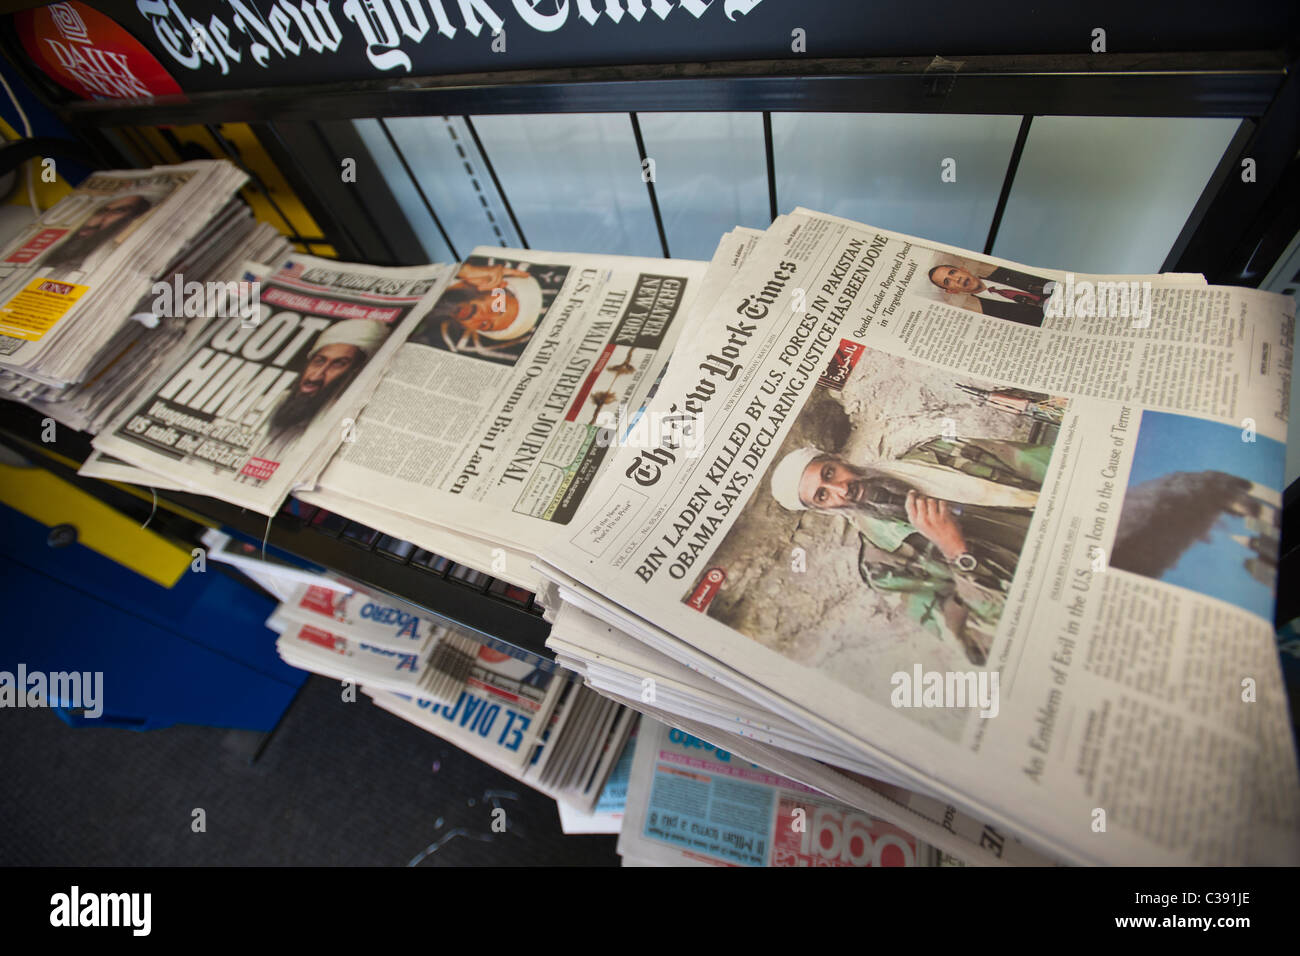 Newspapers At A News Stand In New York On Monday May 2 11 Report On The Killing Of Terrorist Osama Bin Laden Stock Photo Alamy